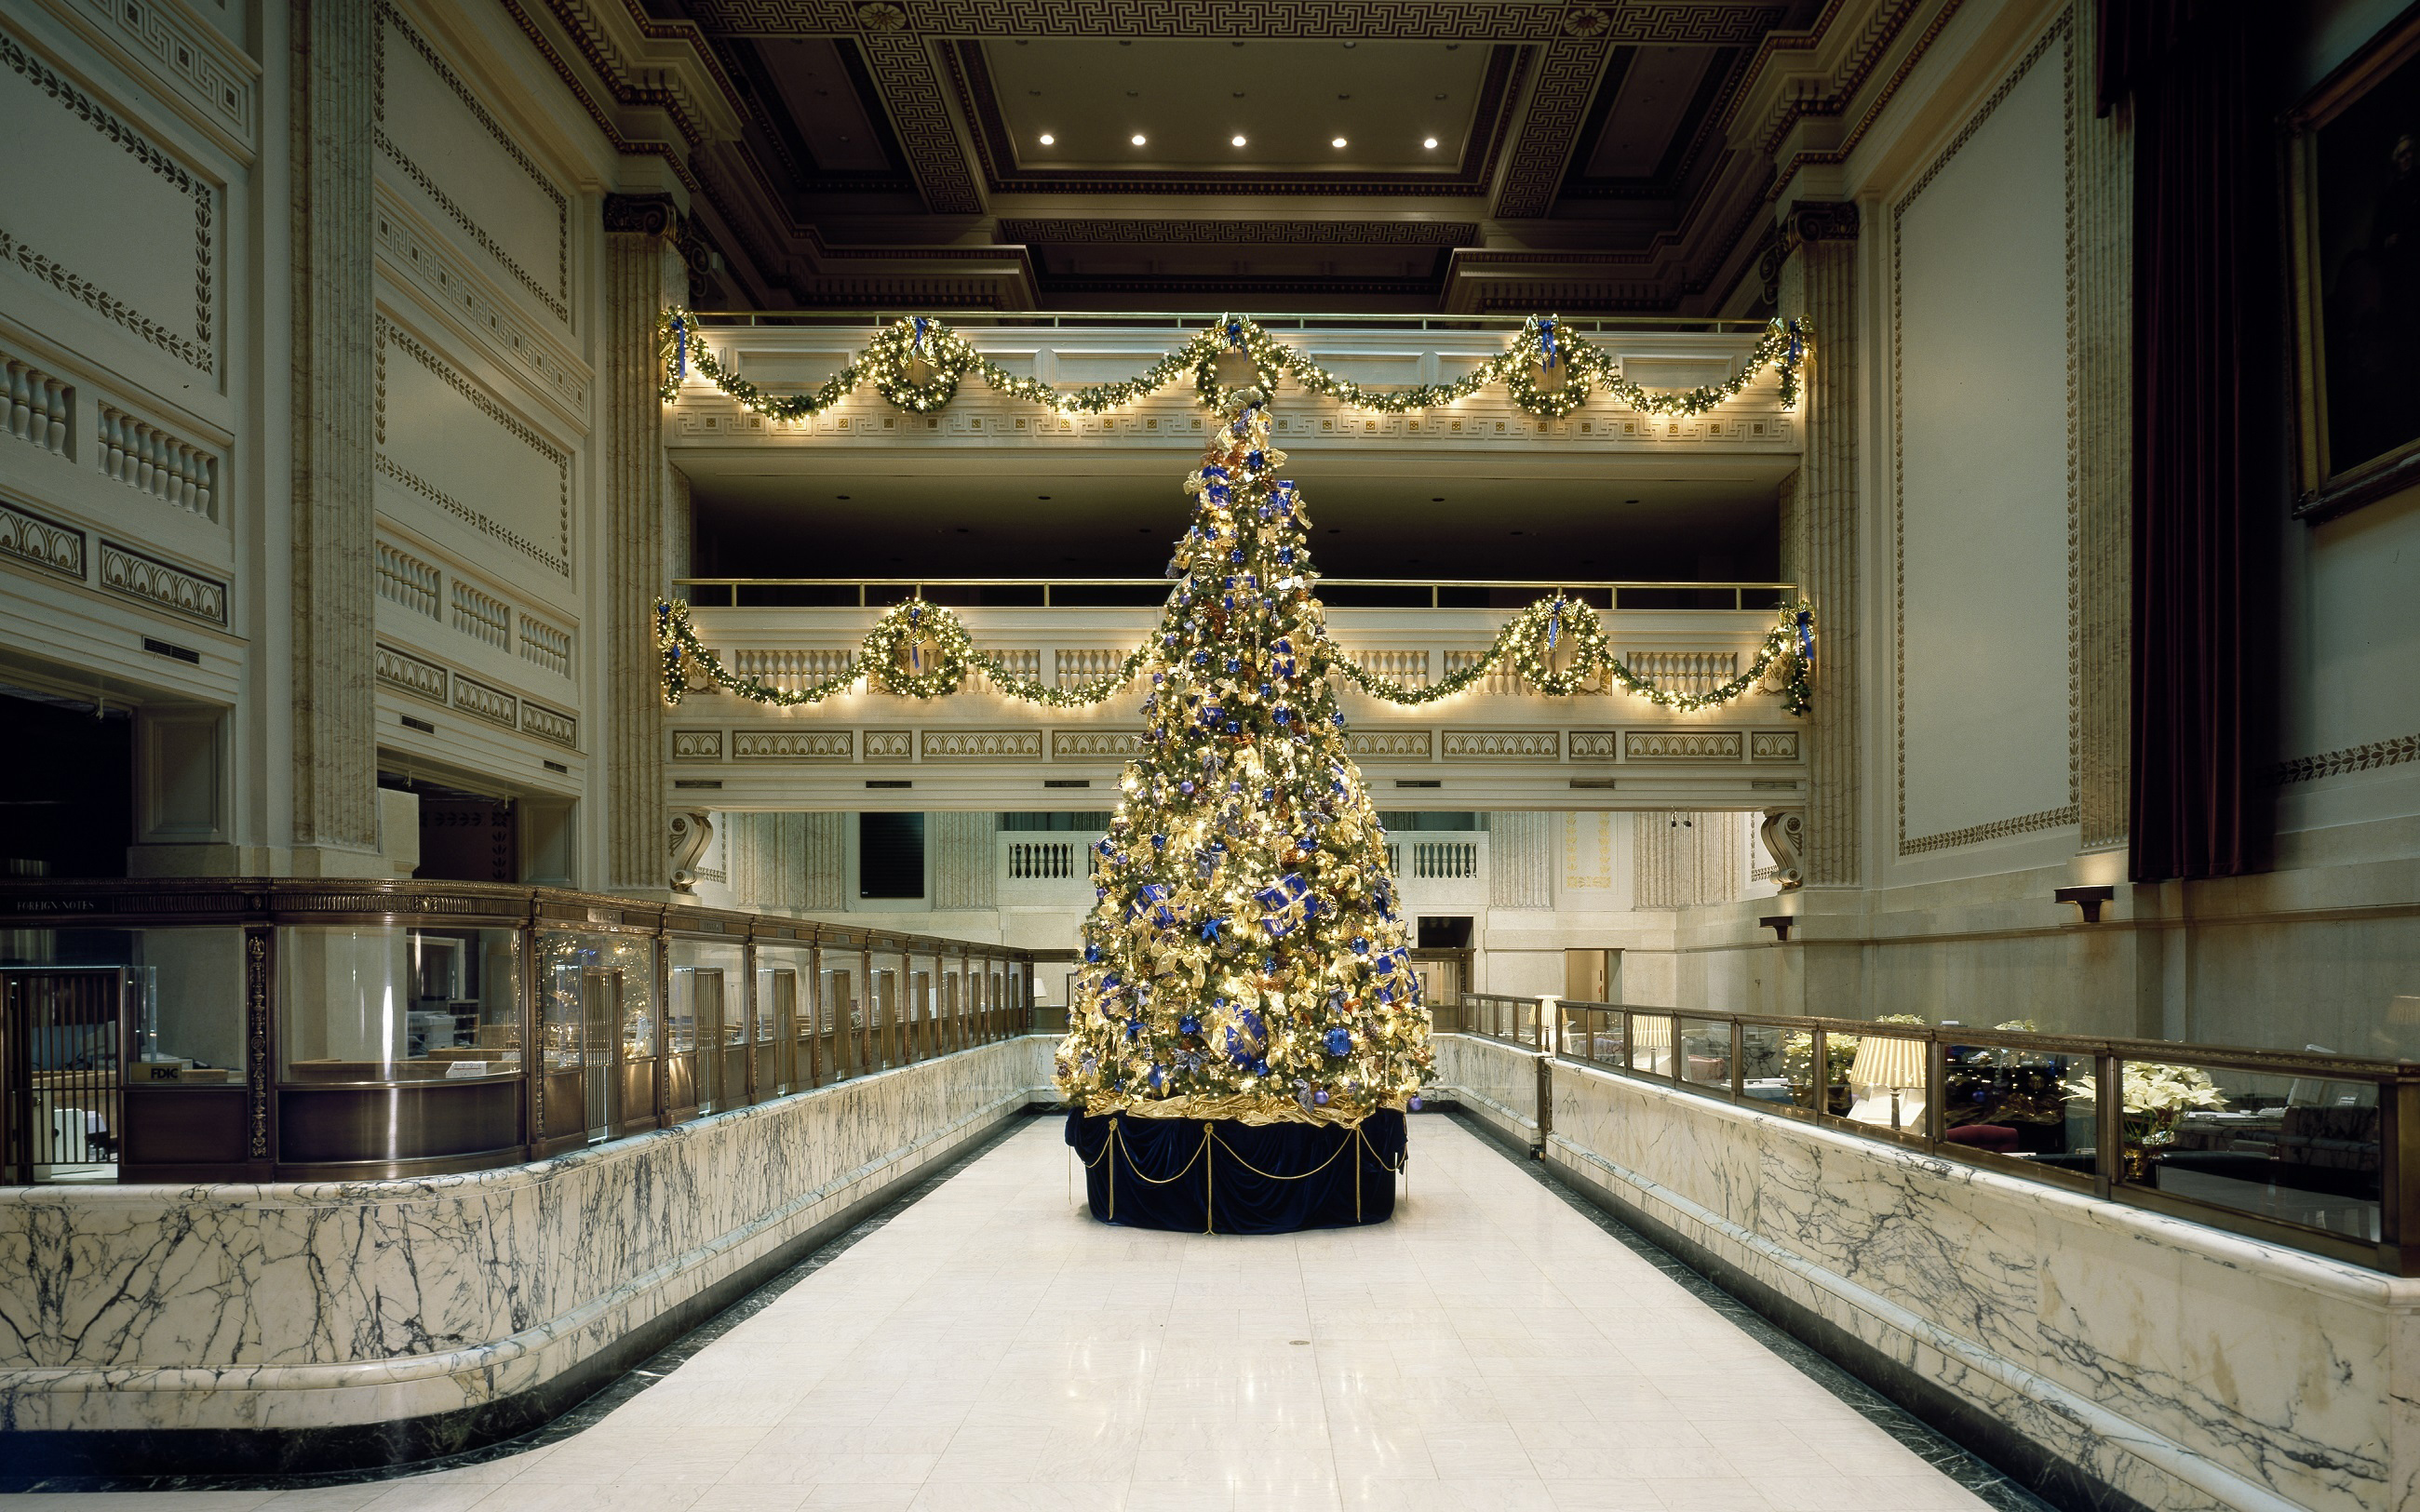 Tall Christmas tree in ornate business lobby